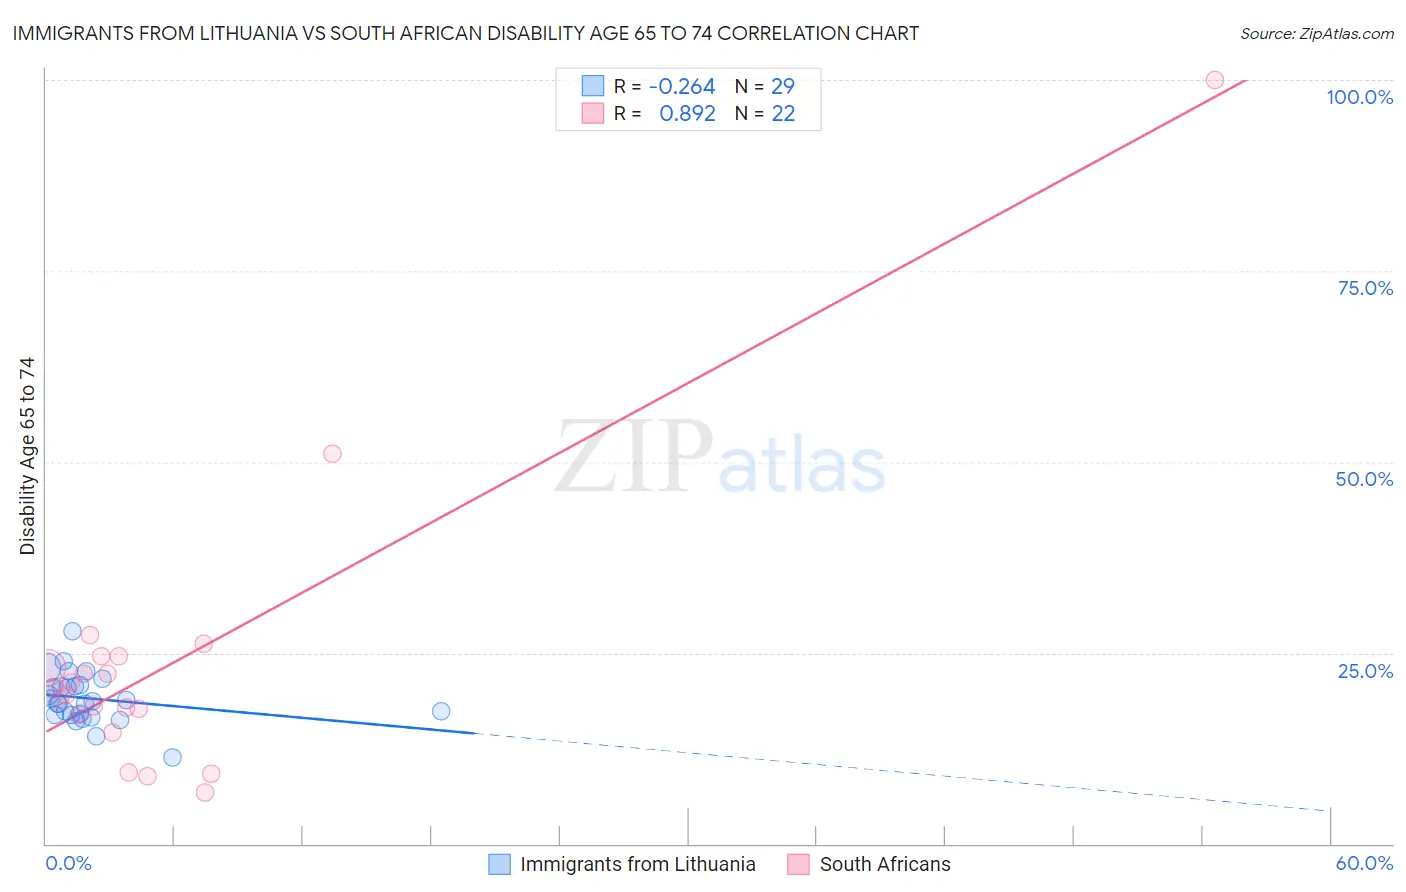 Immigrants from Lithuania vs South African Disability Age 65 to 74